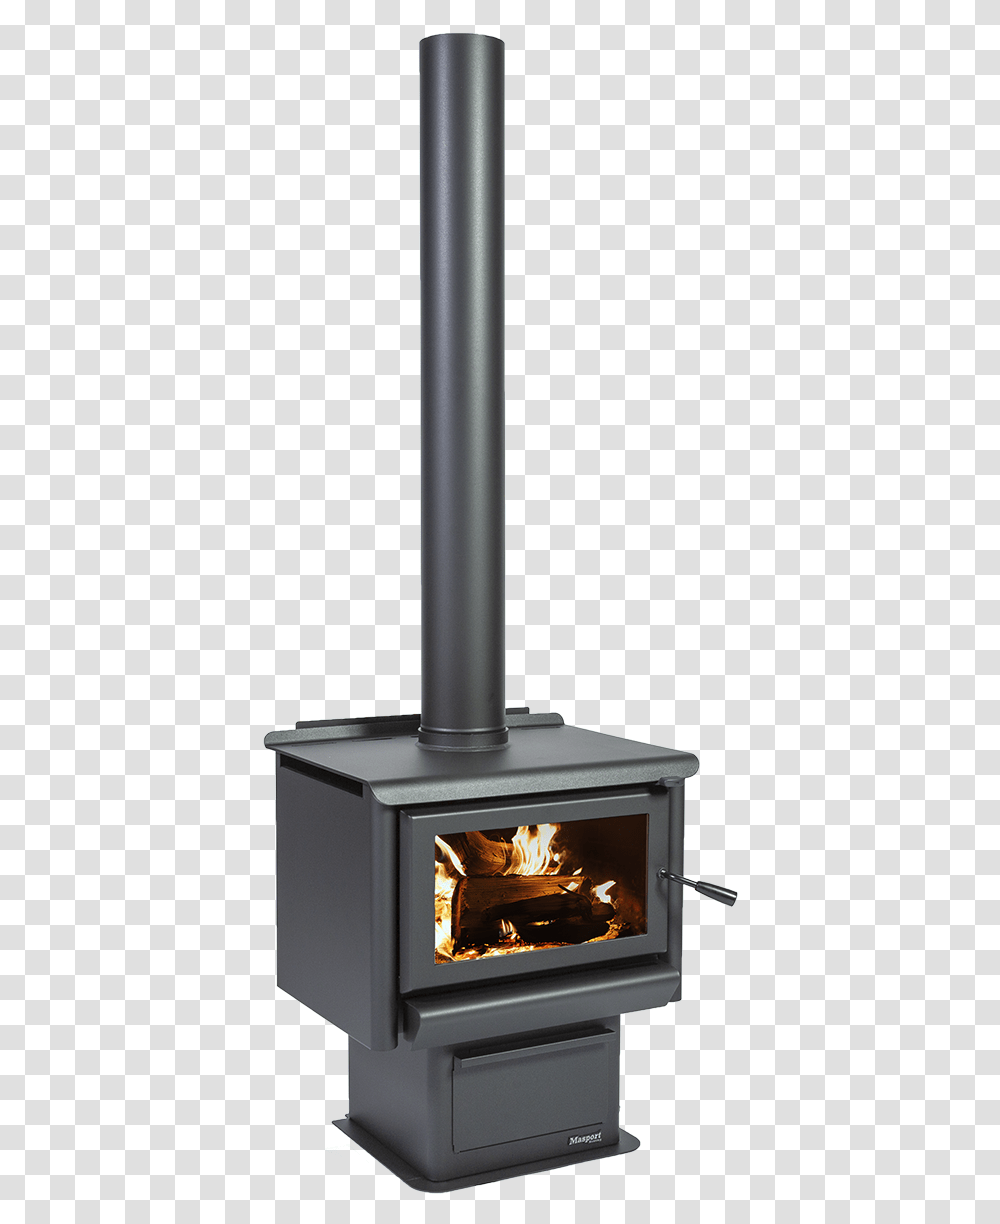 Rubyvale Freestanding Log Fire Woodburning Stove, Fireplace, Indoors, Hearth, Sink Faucet Transparent Png